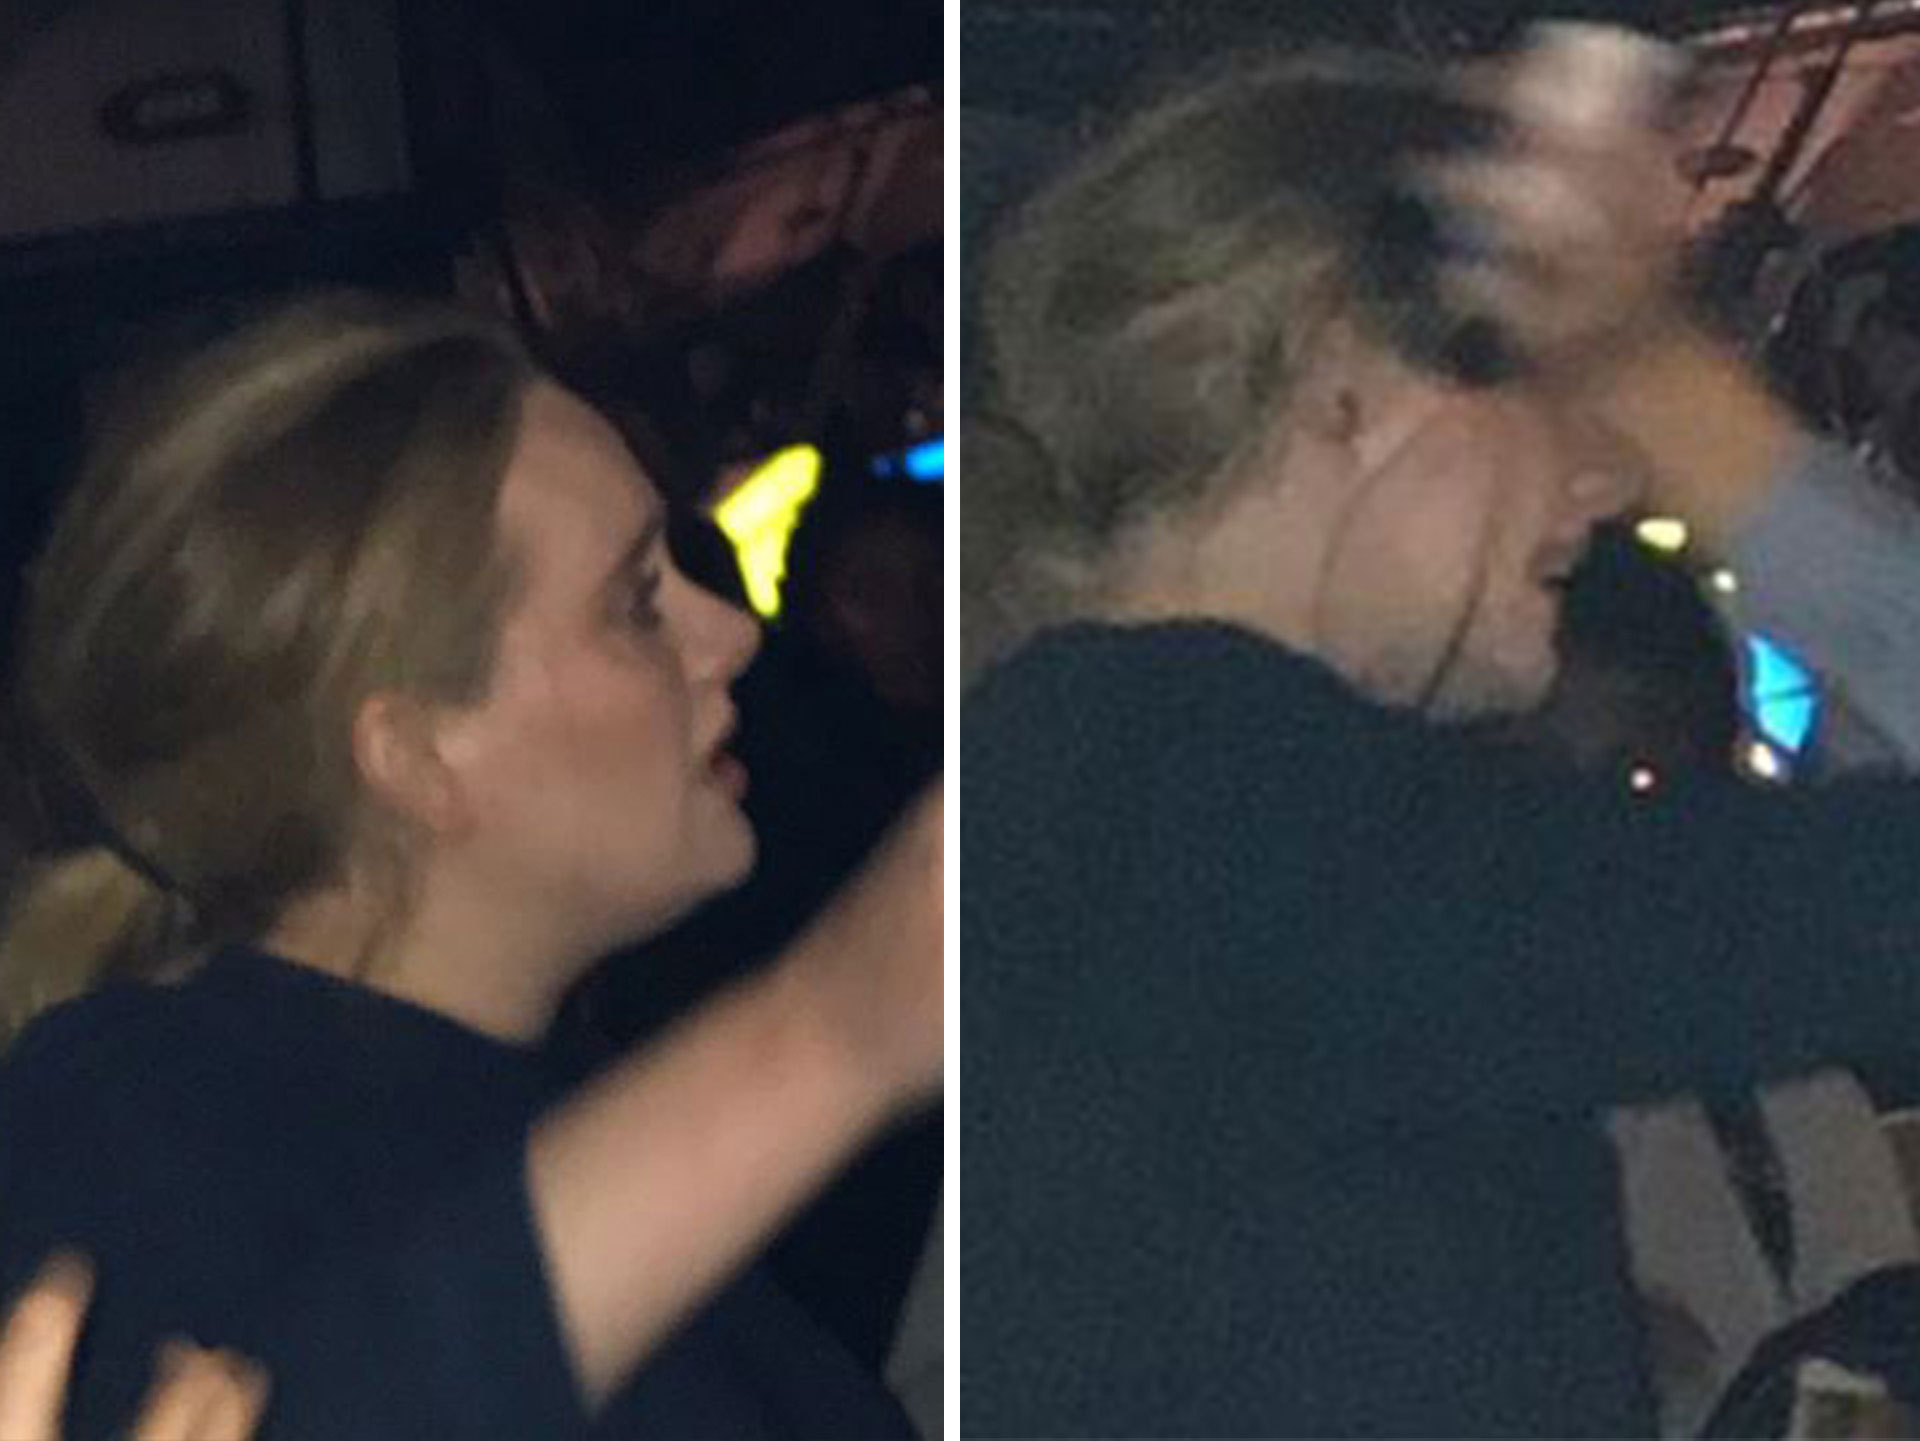 Adele visits victims of London fire less than 24 hours after blaze kills at least 12